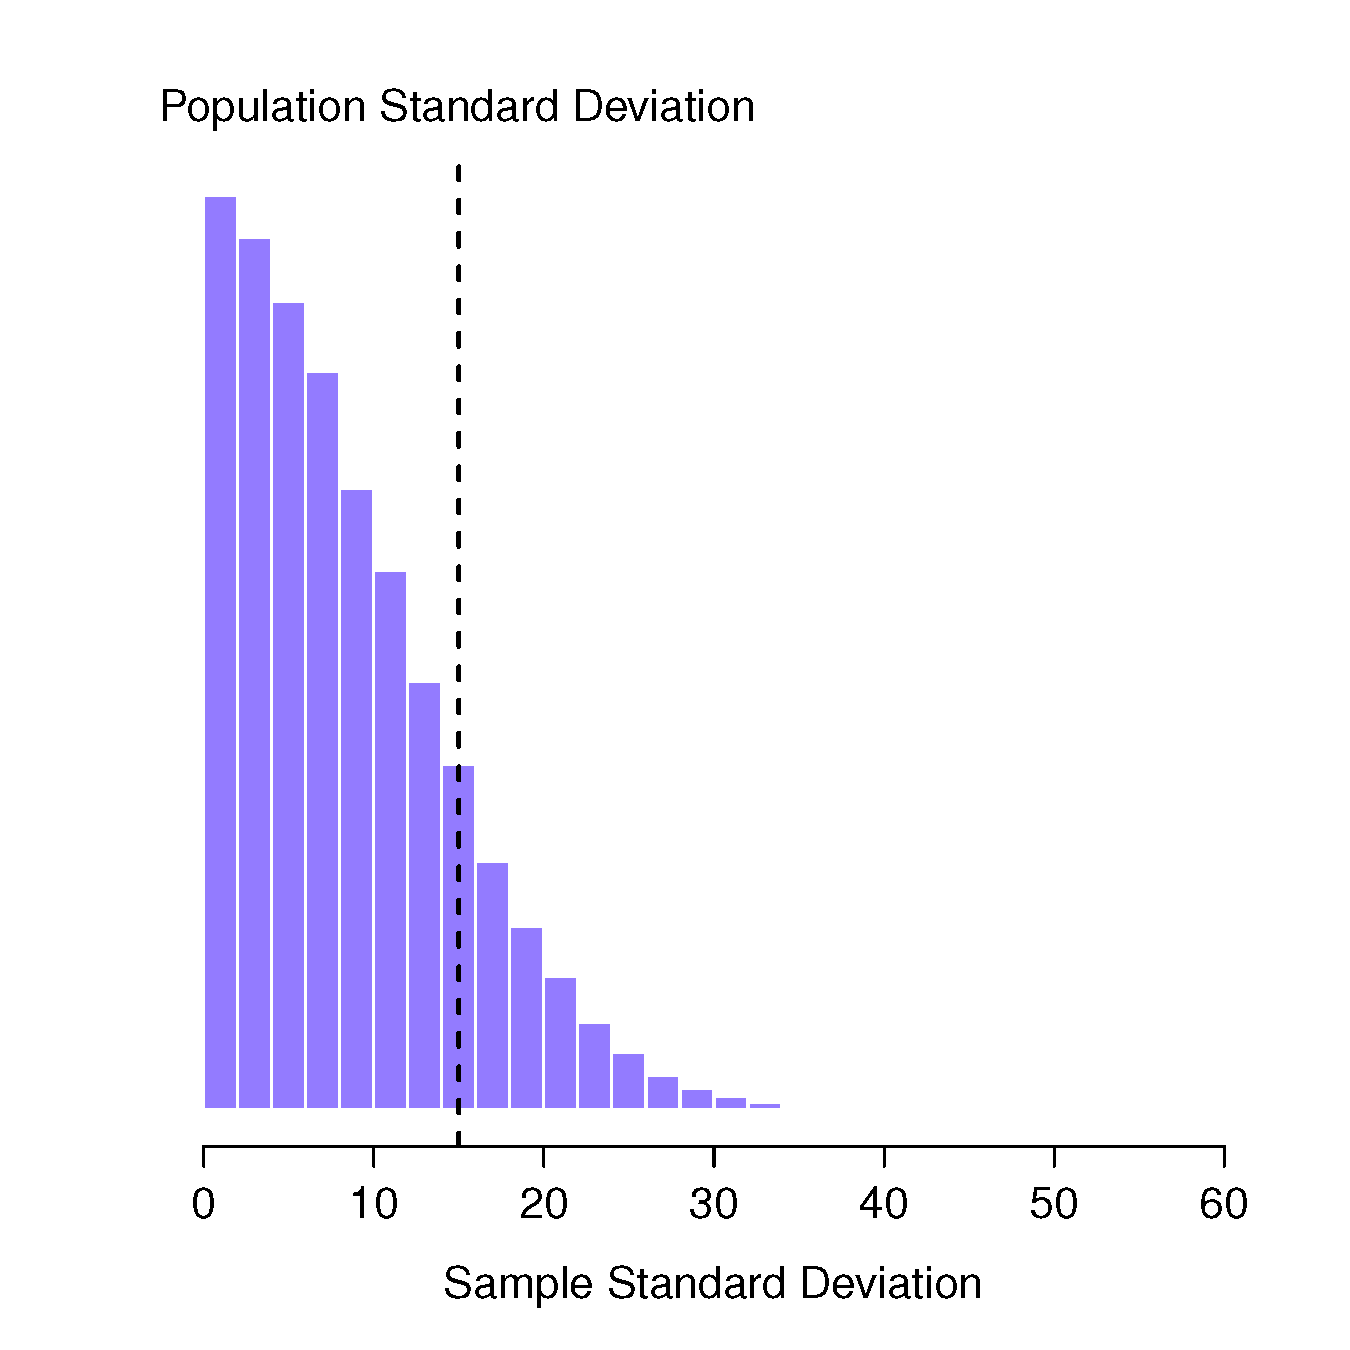 The sampling distribution of the sample standard deviation for a two IQ scores experiment. The true population standard deviation is 15 (dashed line), but as you can see from the histogram, the vast majority of experiments will produce a much smaller sample standard deviation than this. On average, this experiment would produce a sample standard deviation of only 8.5, well below the true value! In other words, the sample standard deviation is a biased estimate of the population standard deviation.